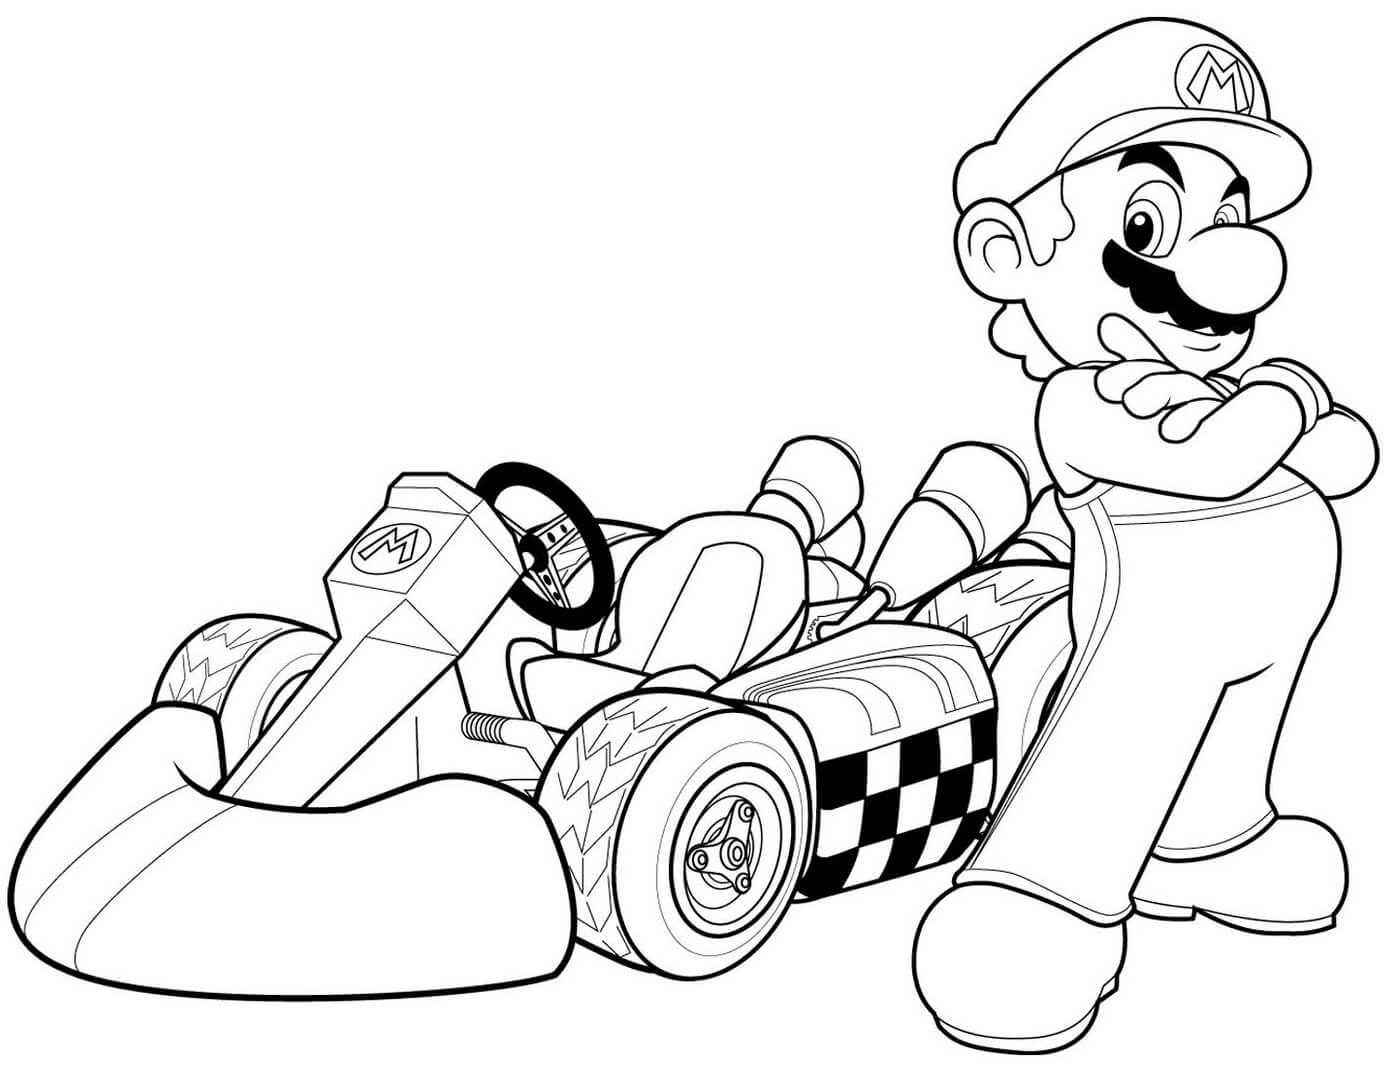 Mario Kart Wii coloring page